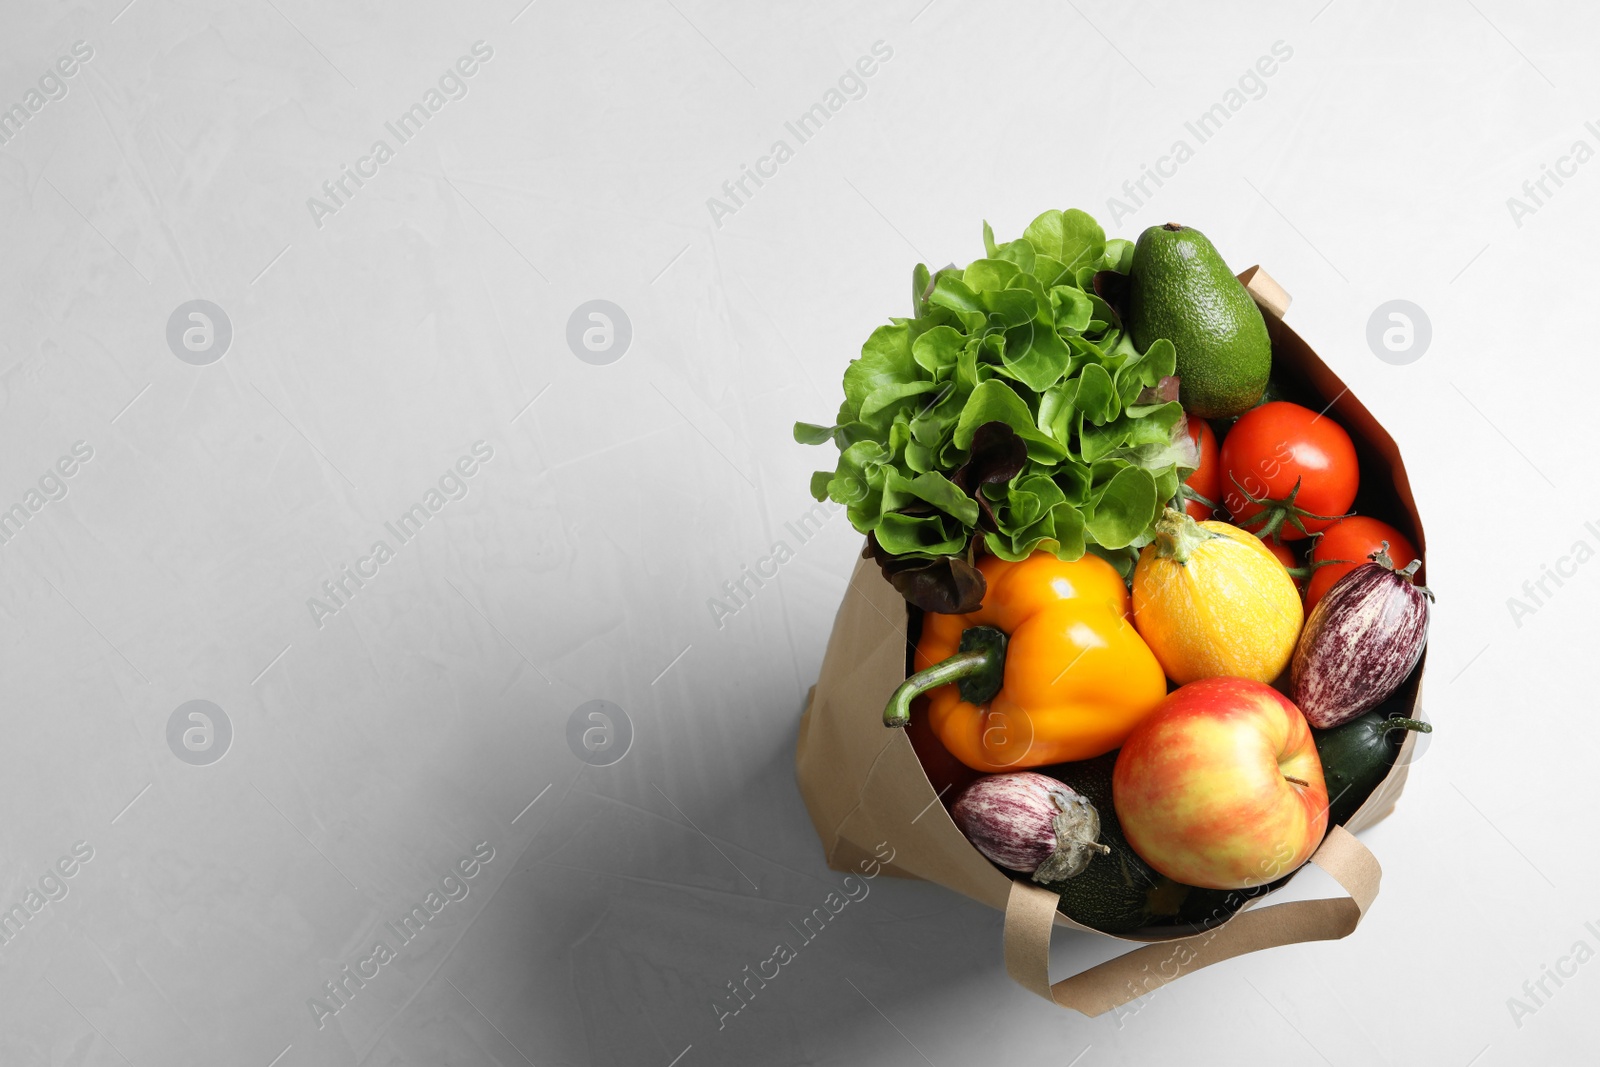 Photo of Paper bag full of fresh vegetables and fruits on light background, top view. Space for text